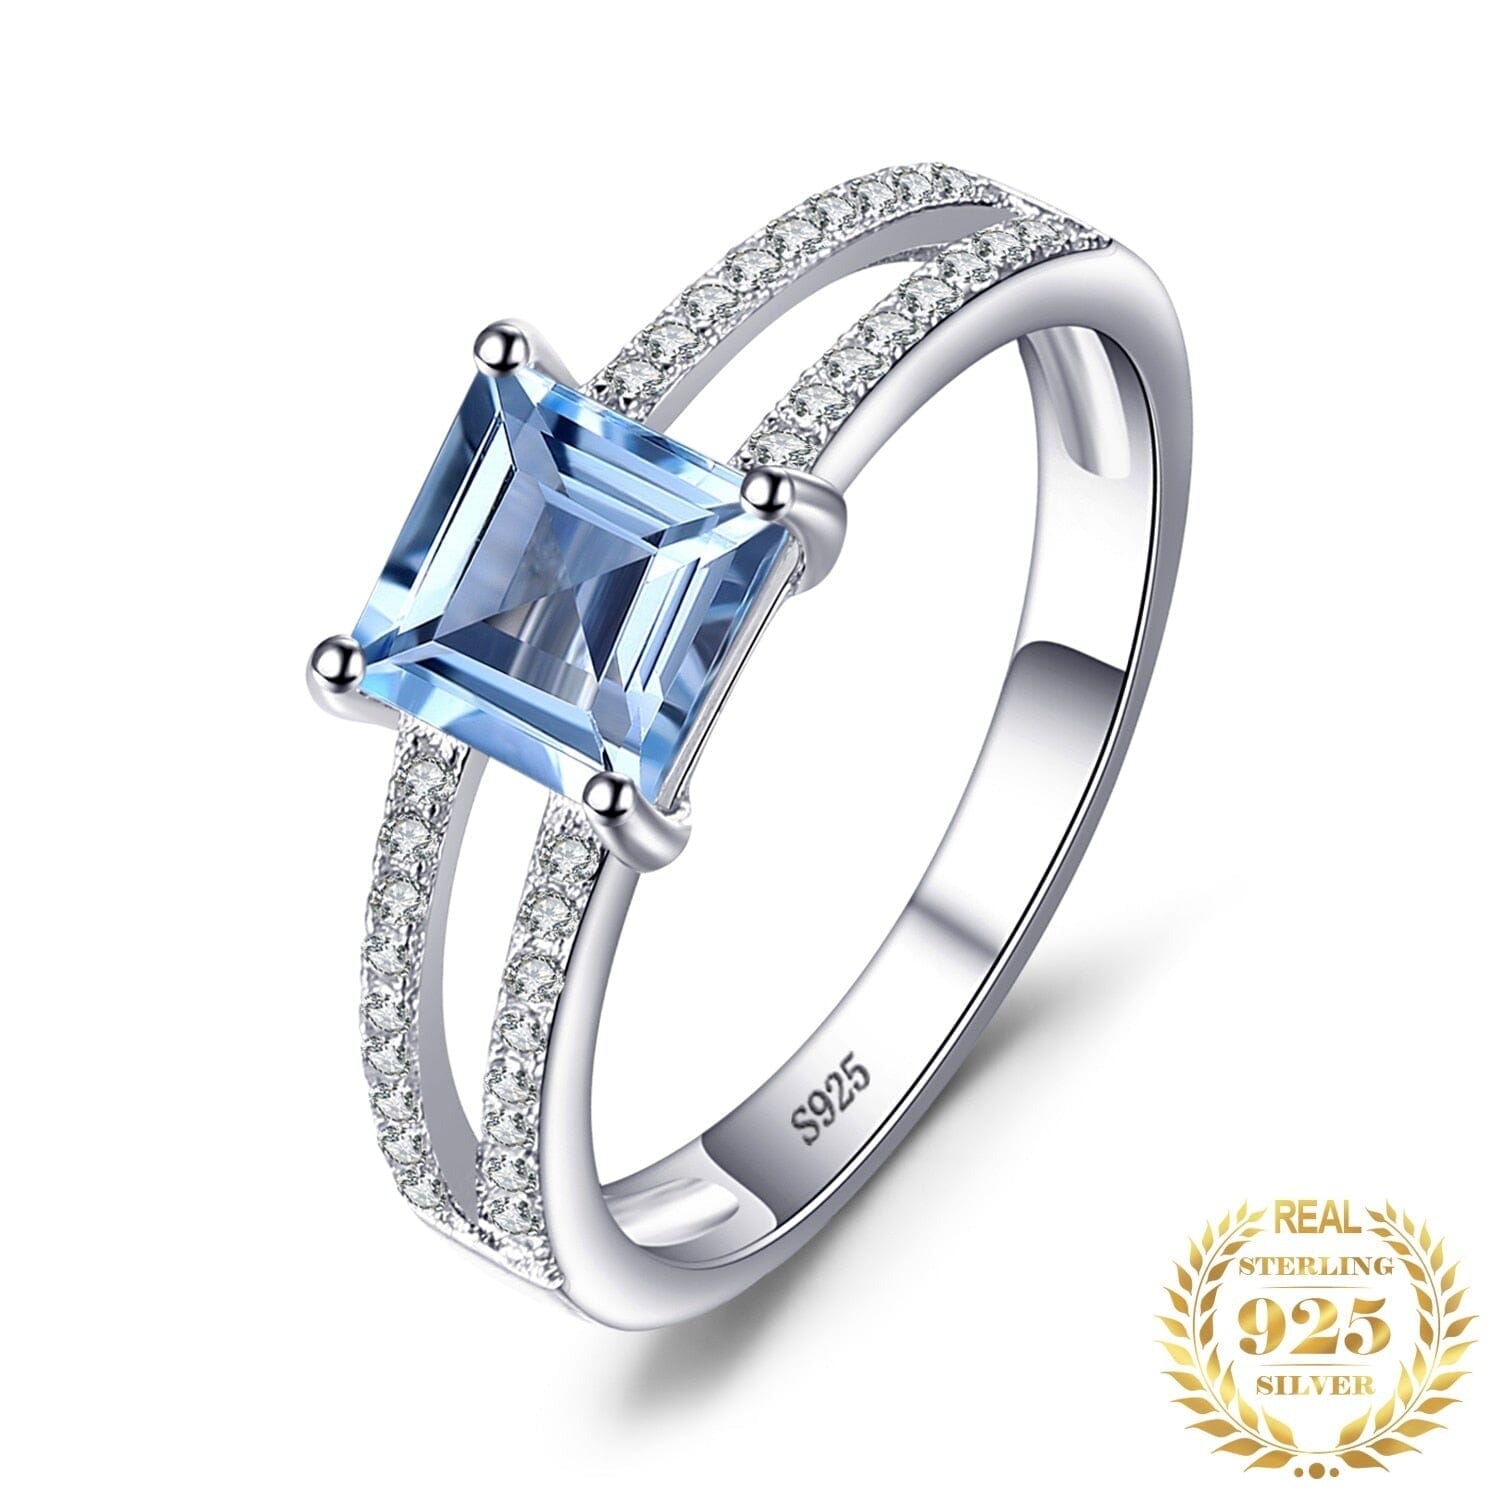 1.2ct Princess Square Cut Sky Blue Topaz Ring - 925 Sterling SilverRing6